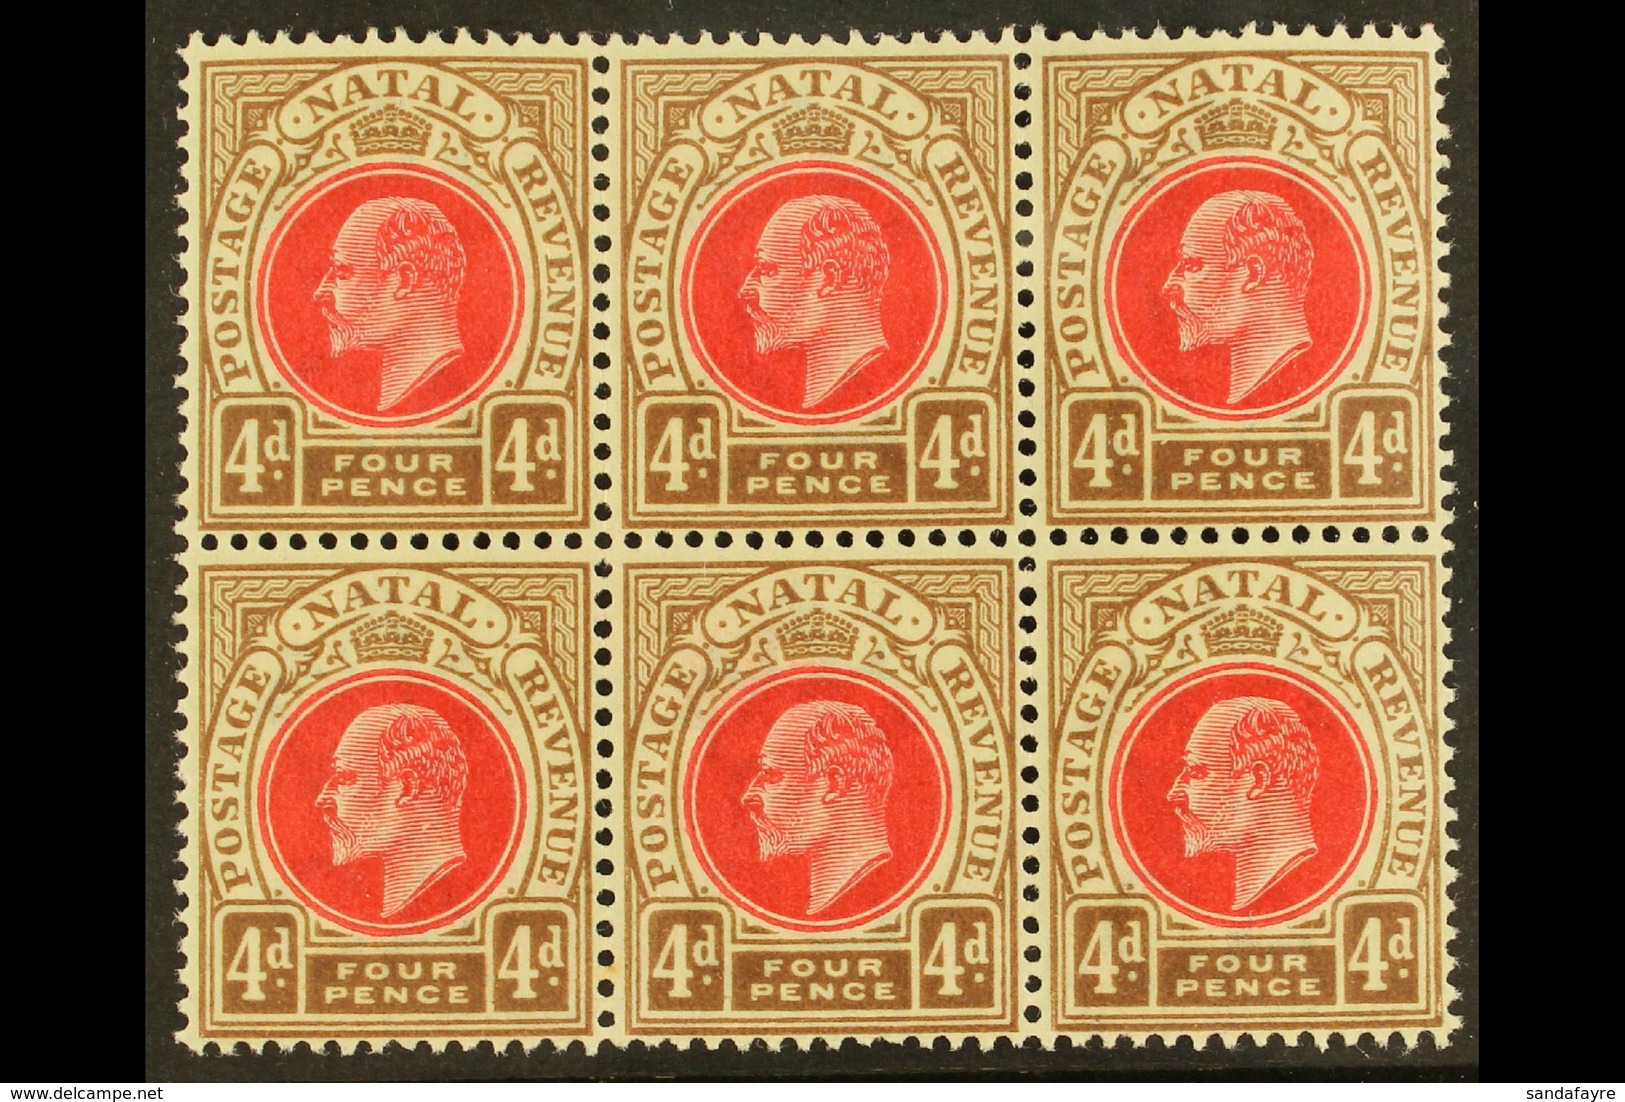 NATAL 1902-3 4d Carmine & Cinnamon, Wmk Crown CA , BLOCK OF SIX, SG 133, Very Slightly Toned Gum, Otherwise Never Hinged - Non Classificati